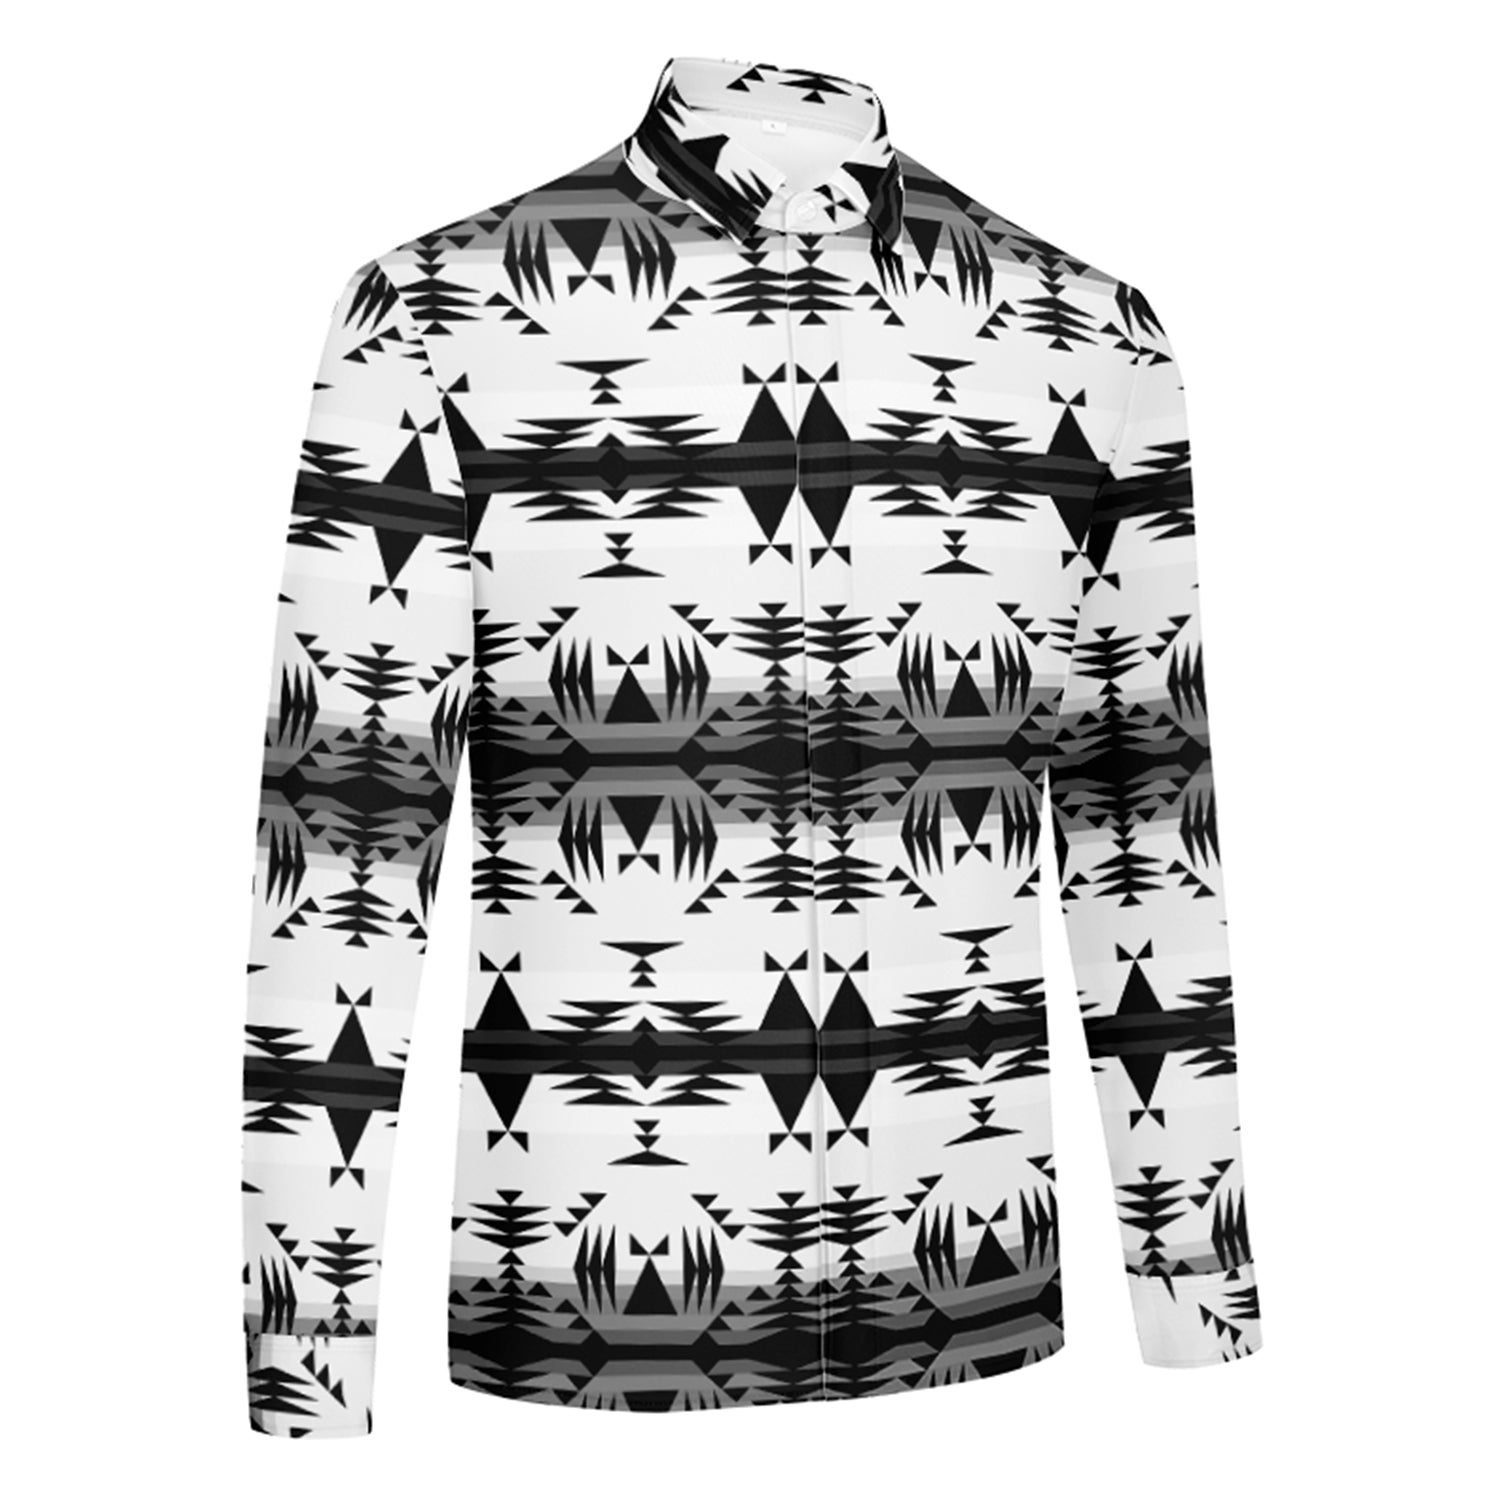 Between the Mountains White and Black Men's Long Sleeve Dress Shirt